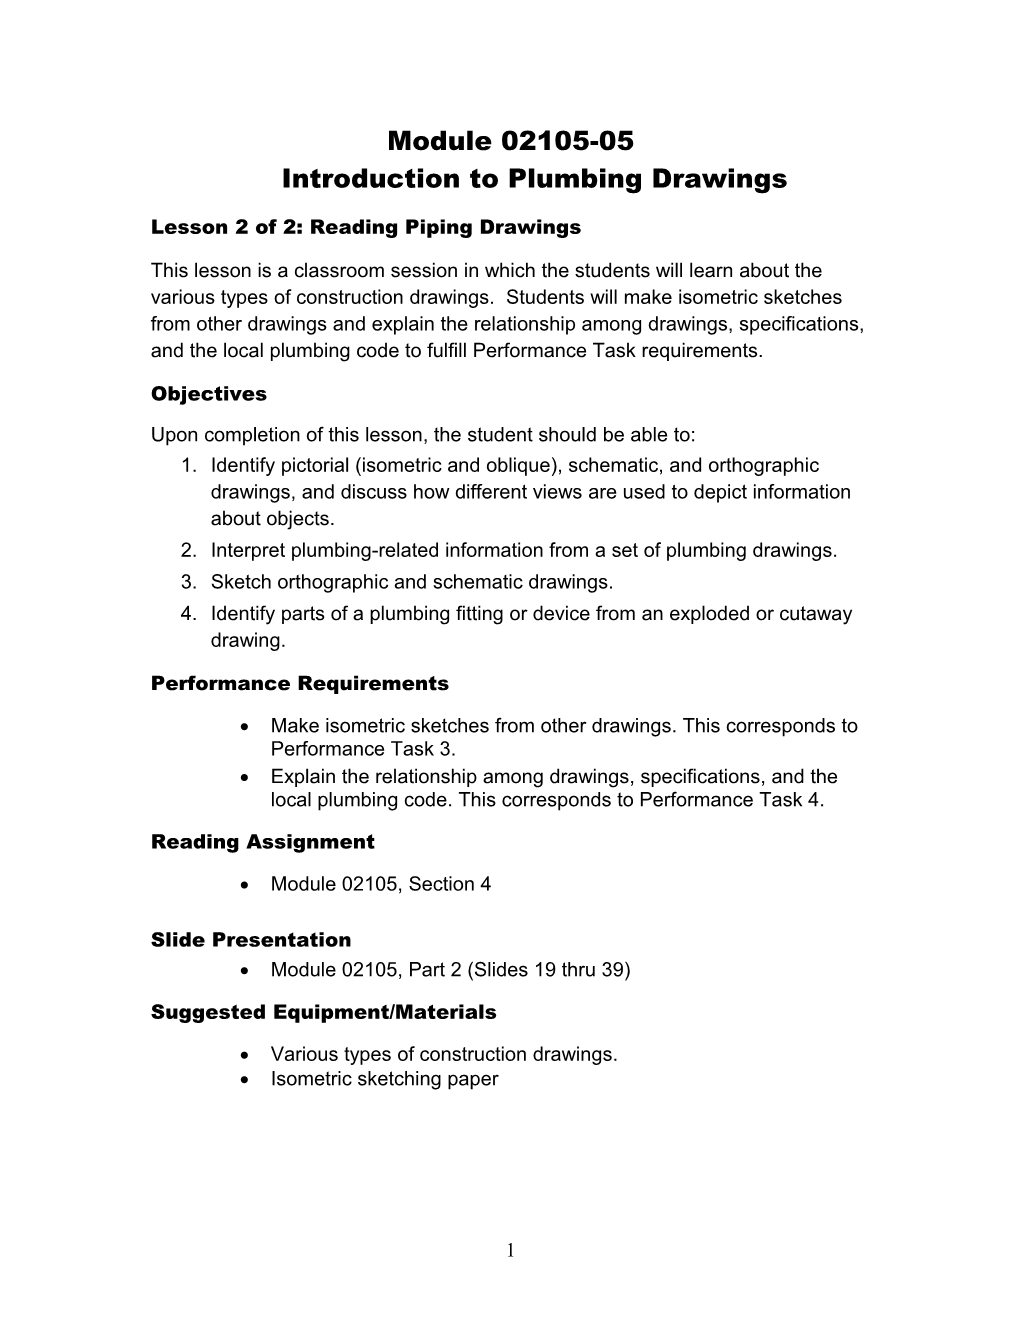 Module 02105-05Introduction to Plumbing Drawings